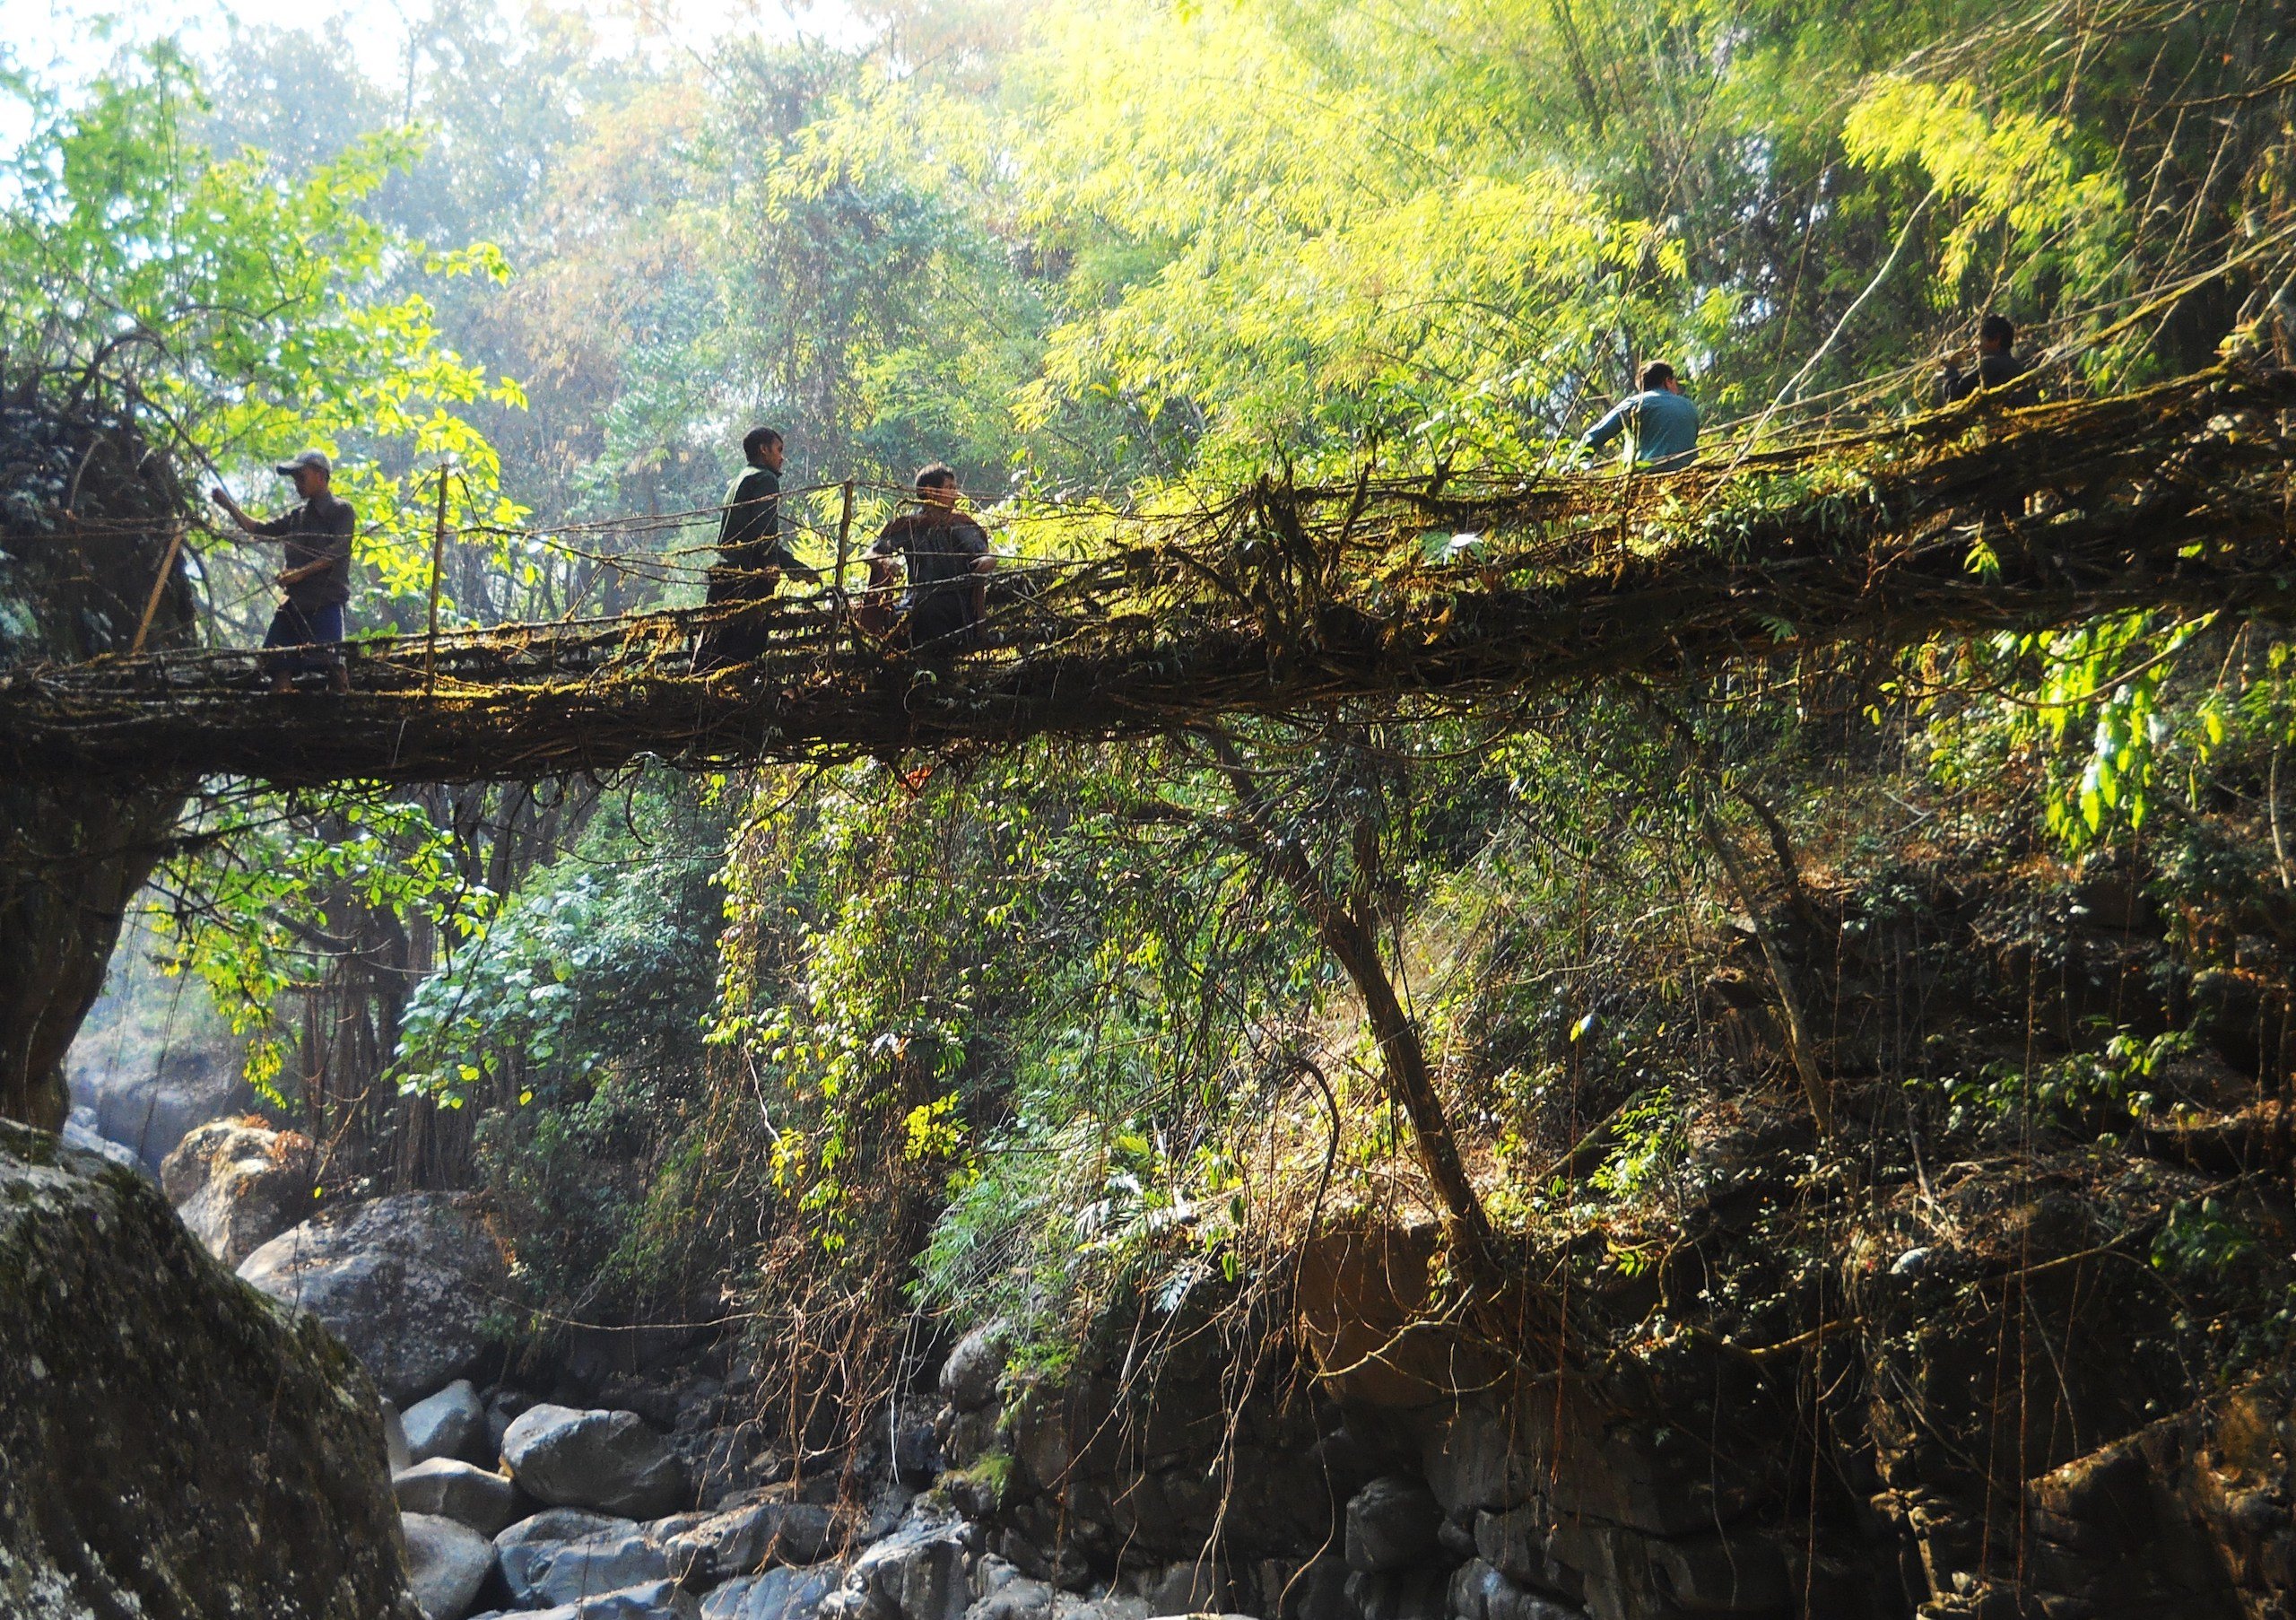 <p>Bridges made of living roots in the biodiversity hotspots of northeast India are good examples of nature-friendly traditions (Image: <a href = "https://commons.wikimedia.org/wiki/File:10_Shnongpdei_1.JPG">Anselmrogers</a> / <a href = "https://creativecommons.org/licenses/by-sa/4.0/deed.en">CC BY-SA 4.0</a>)</p>